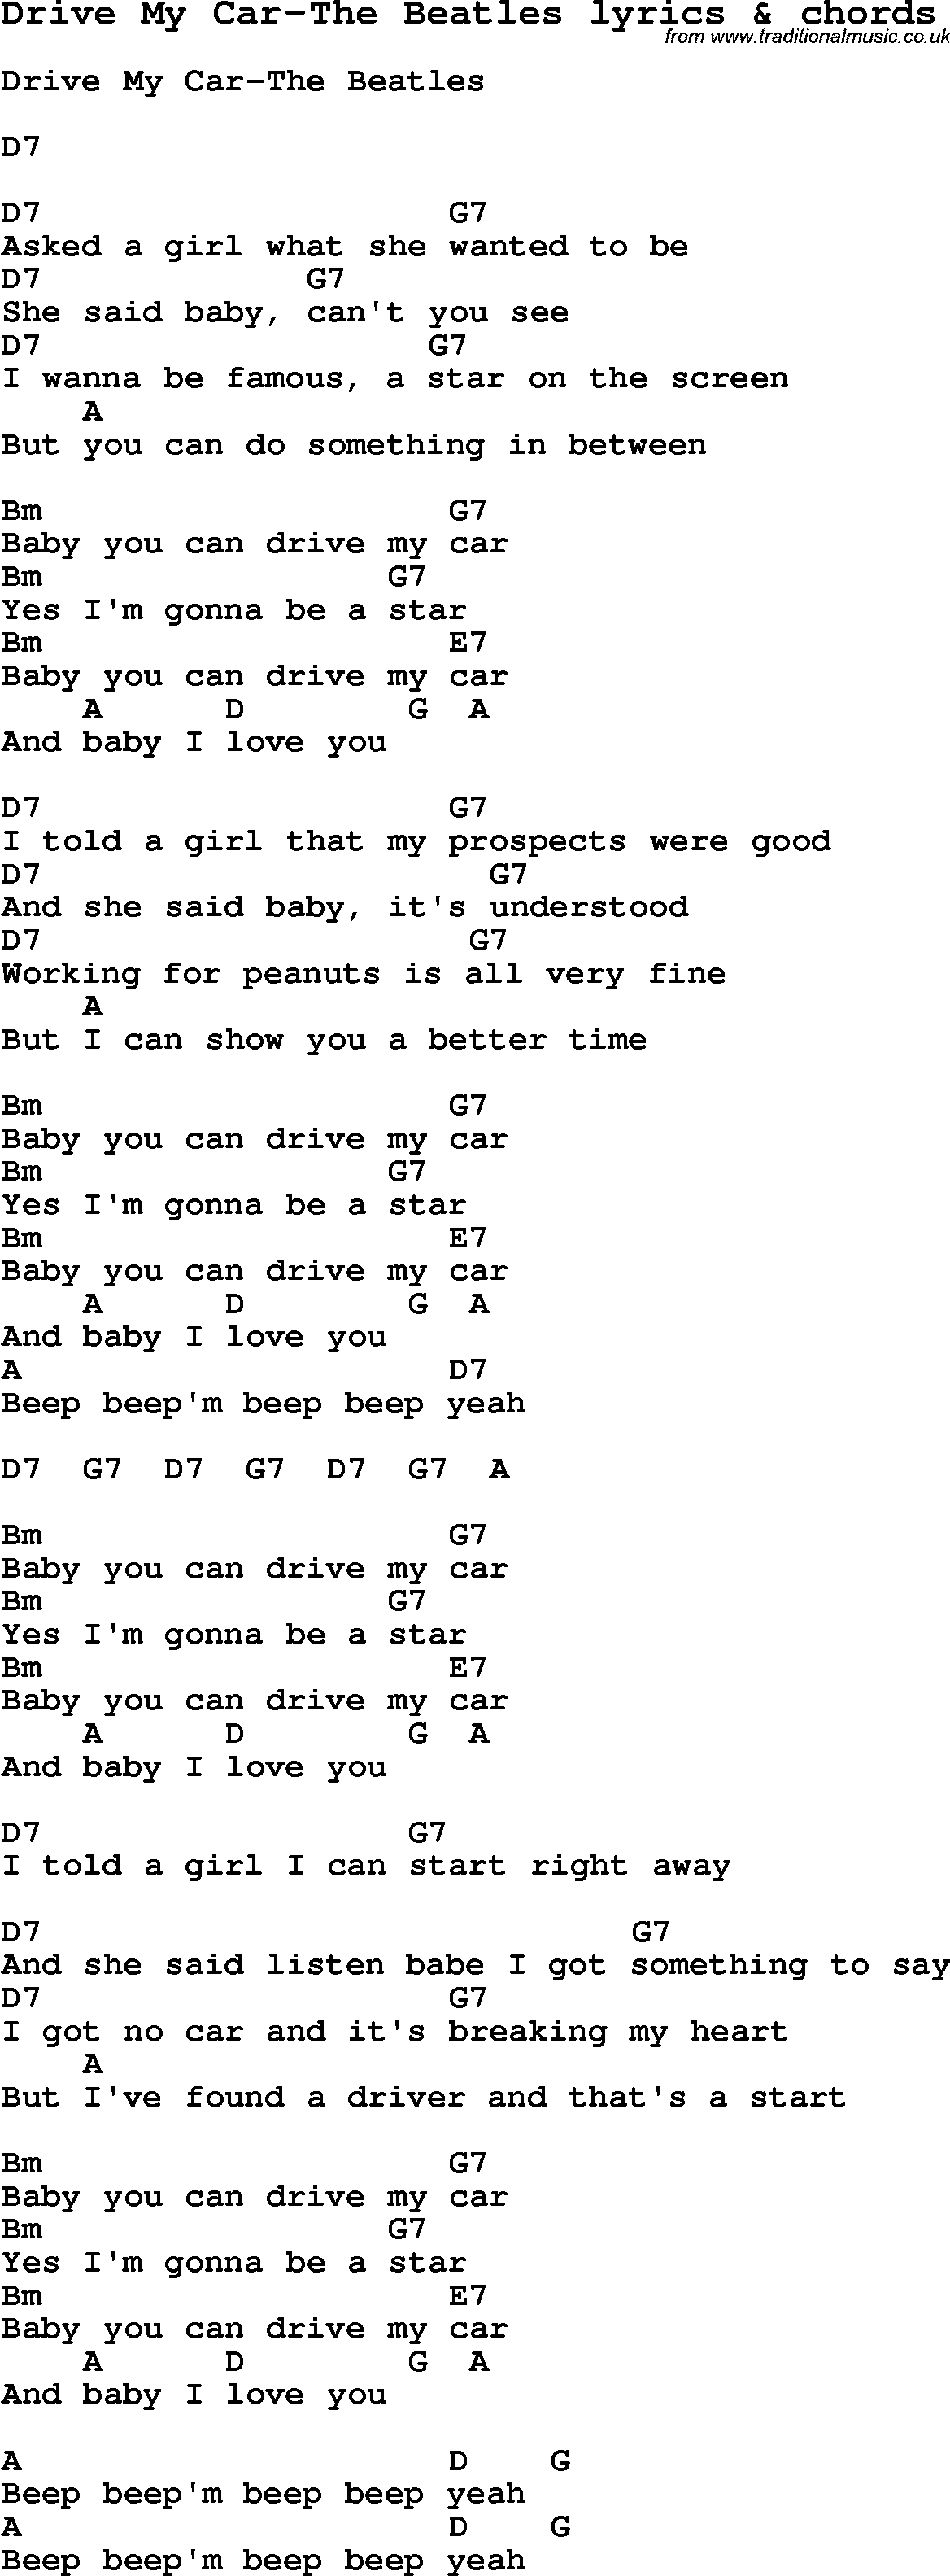 Love Song Lyrics for: Drive My Car-The Beatles with chords for Ukulele, Guitar Banjo etc.